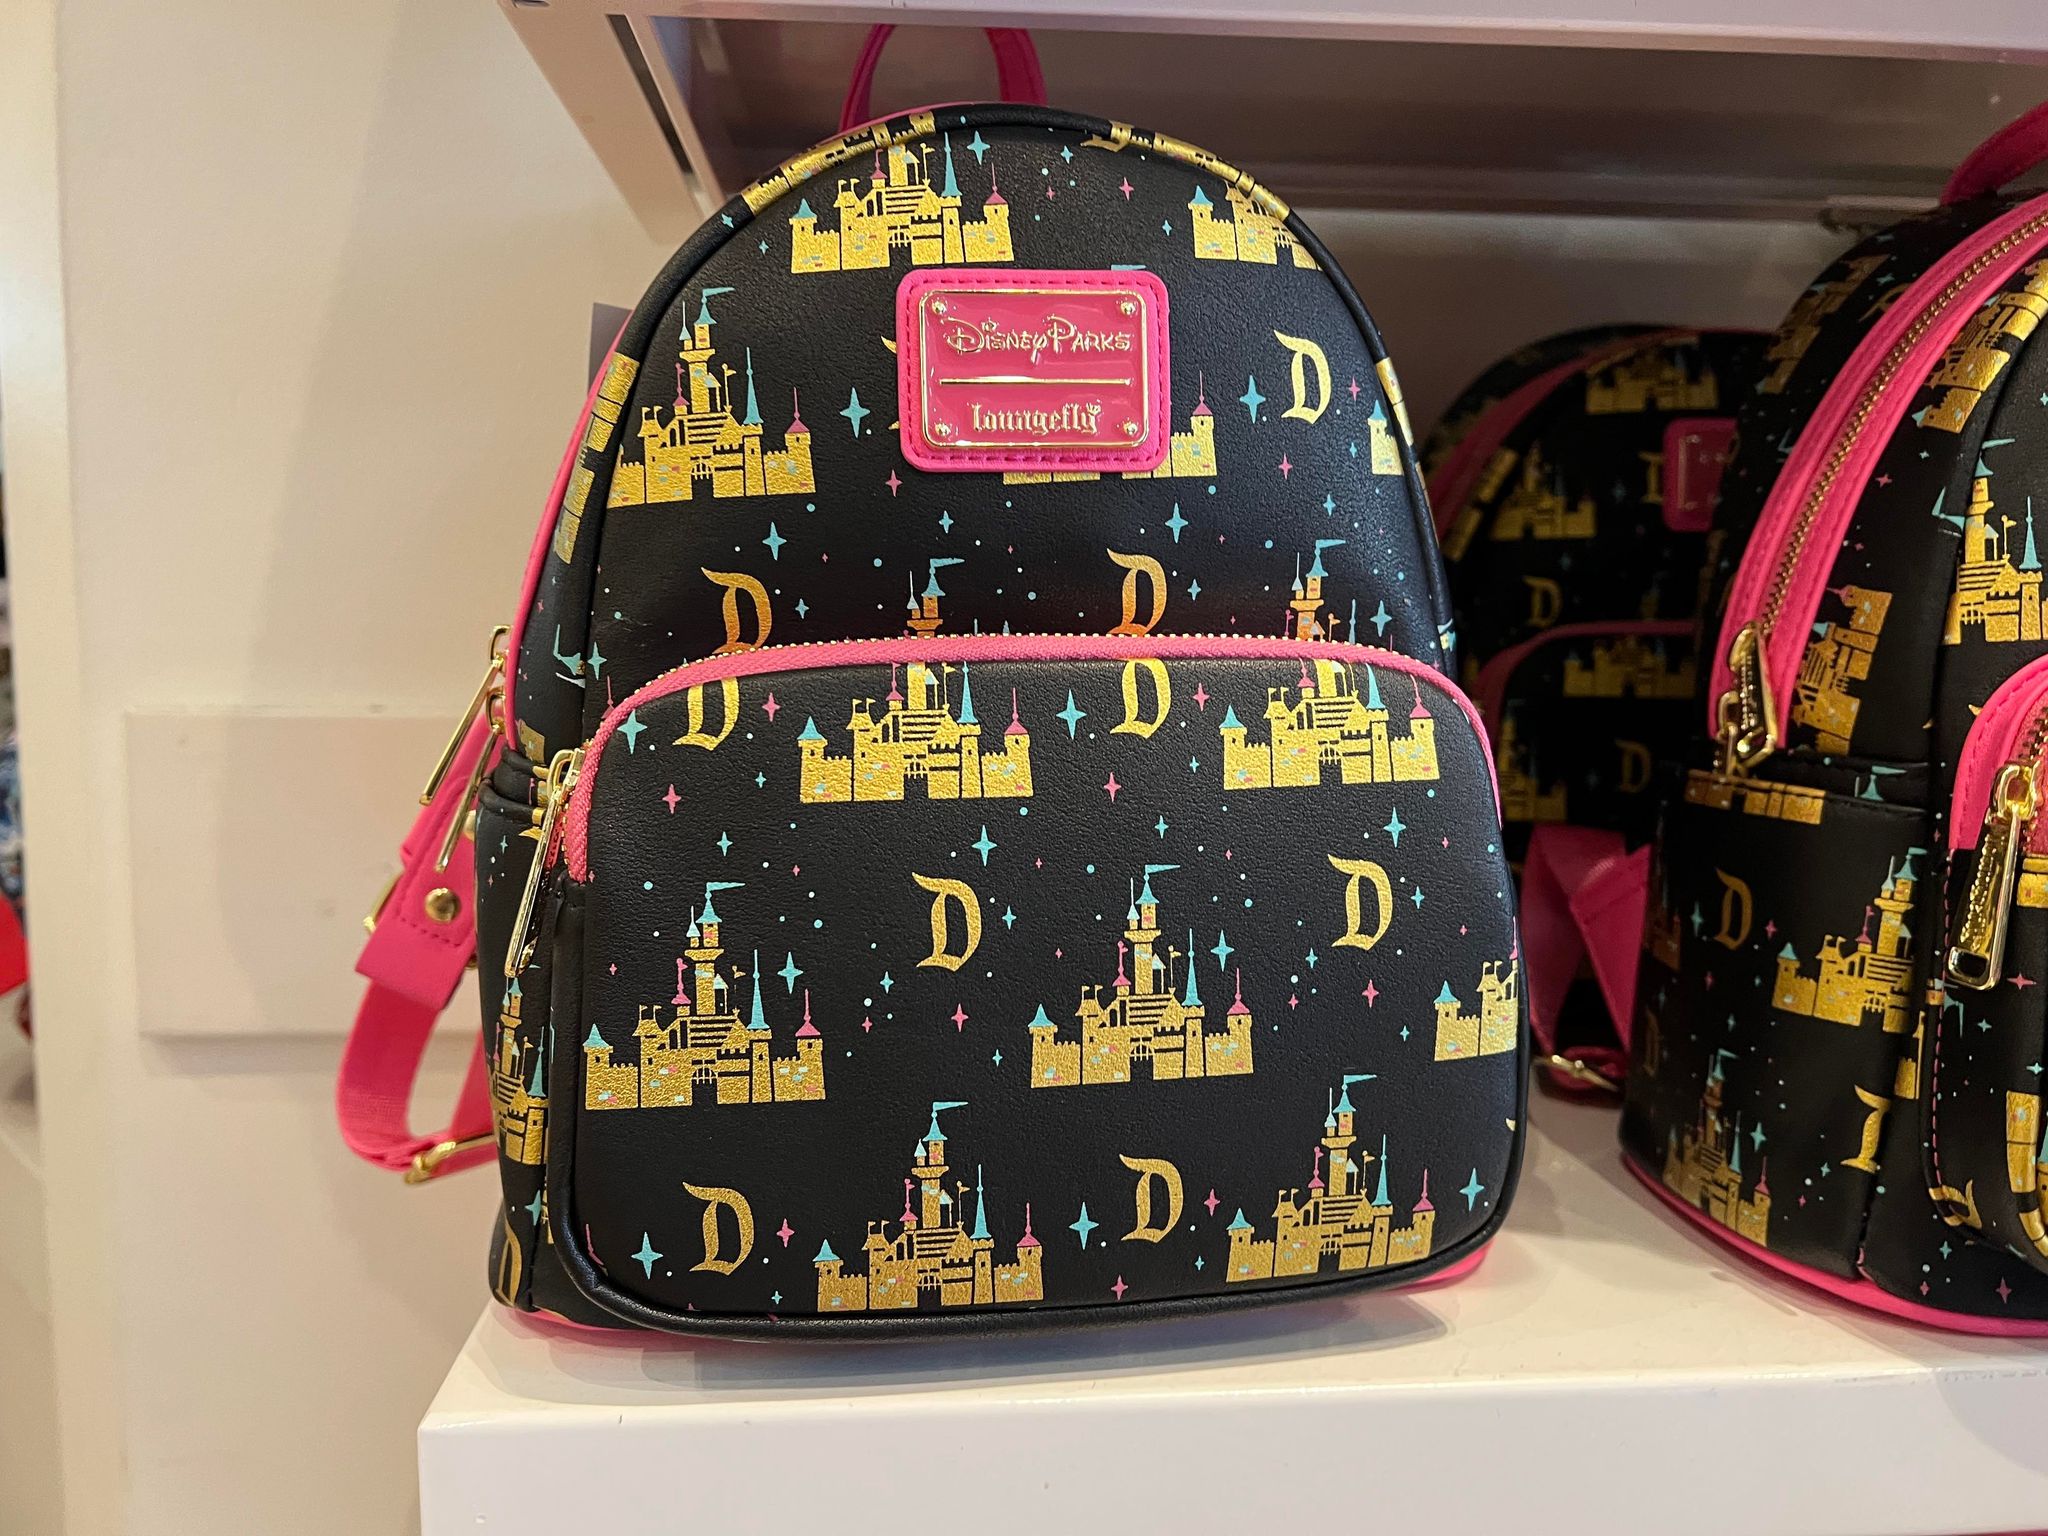 Main Street Electrical Parade Dress, Mouse Ears and Loungefly Bag